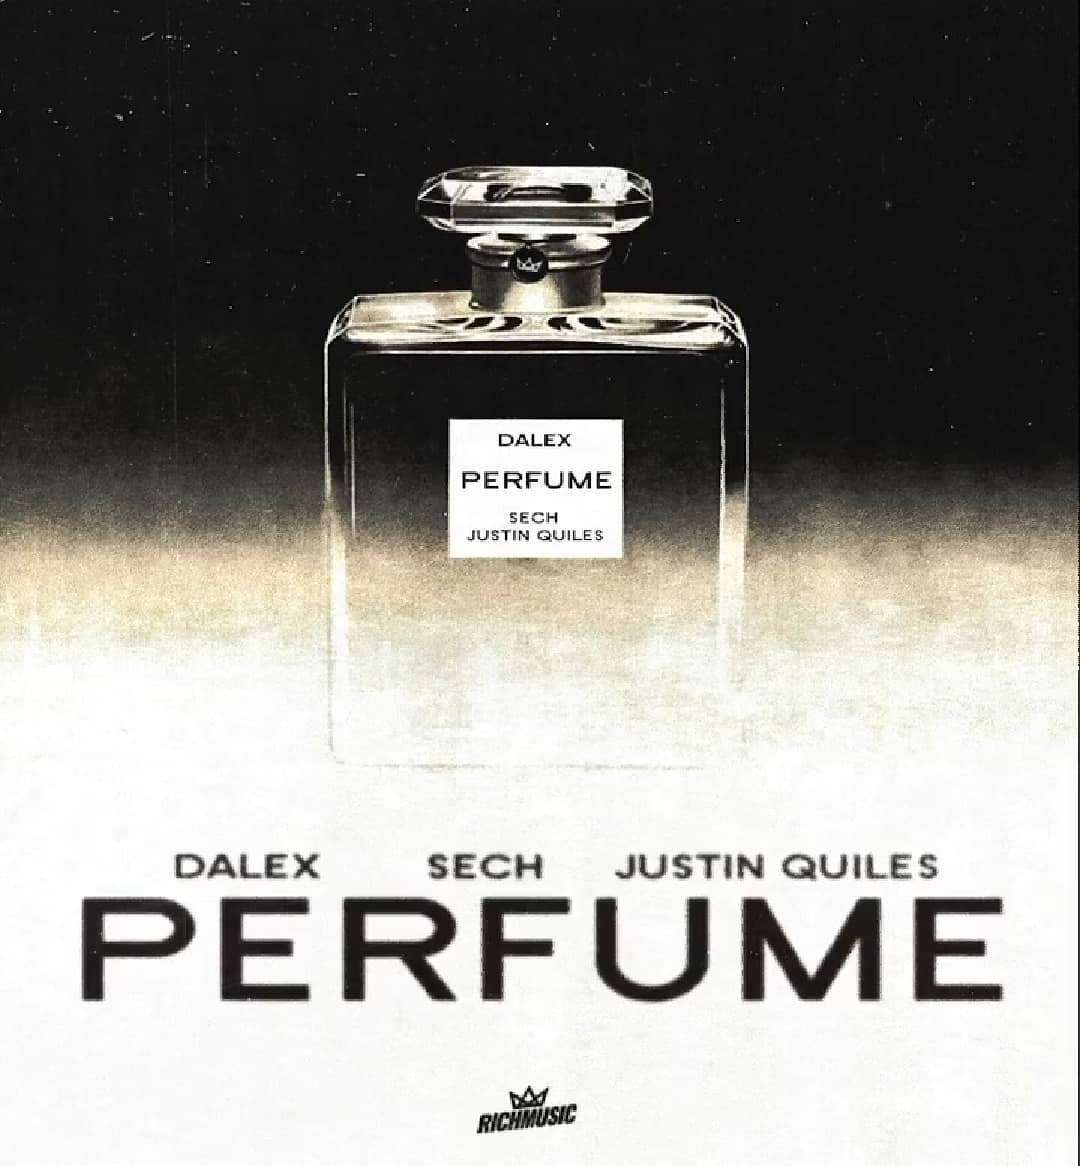 Perfume-Sech-Dalex y Justin Quiles